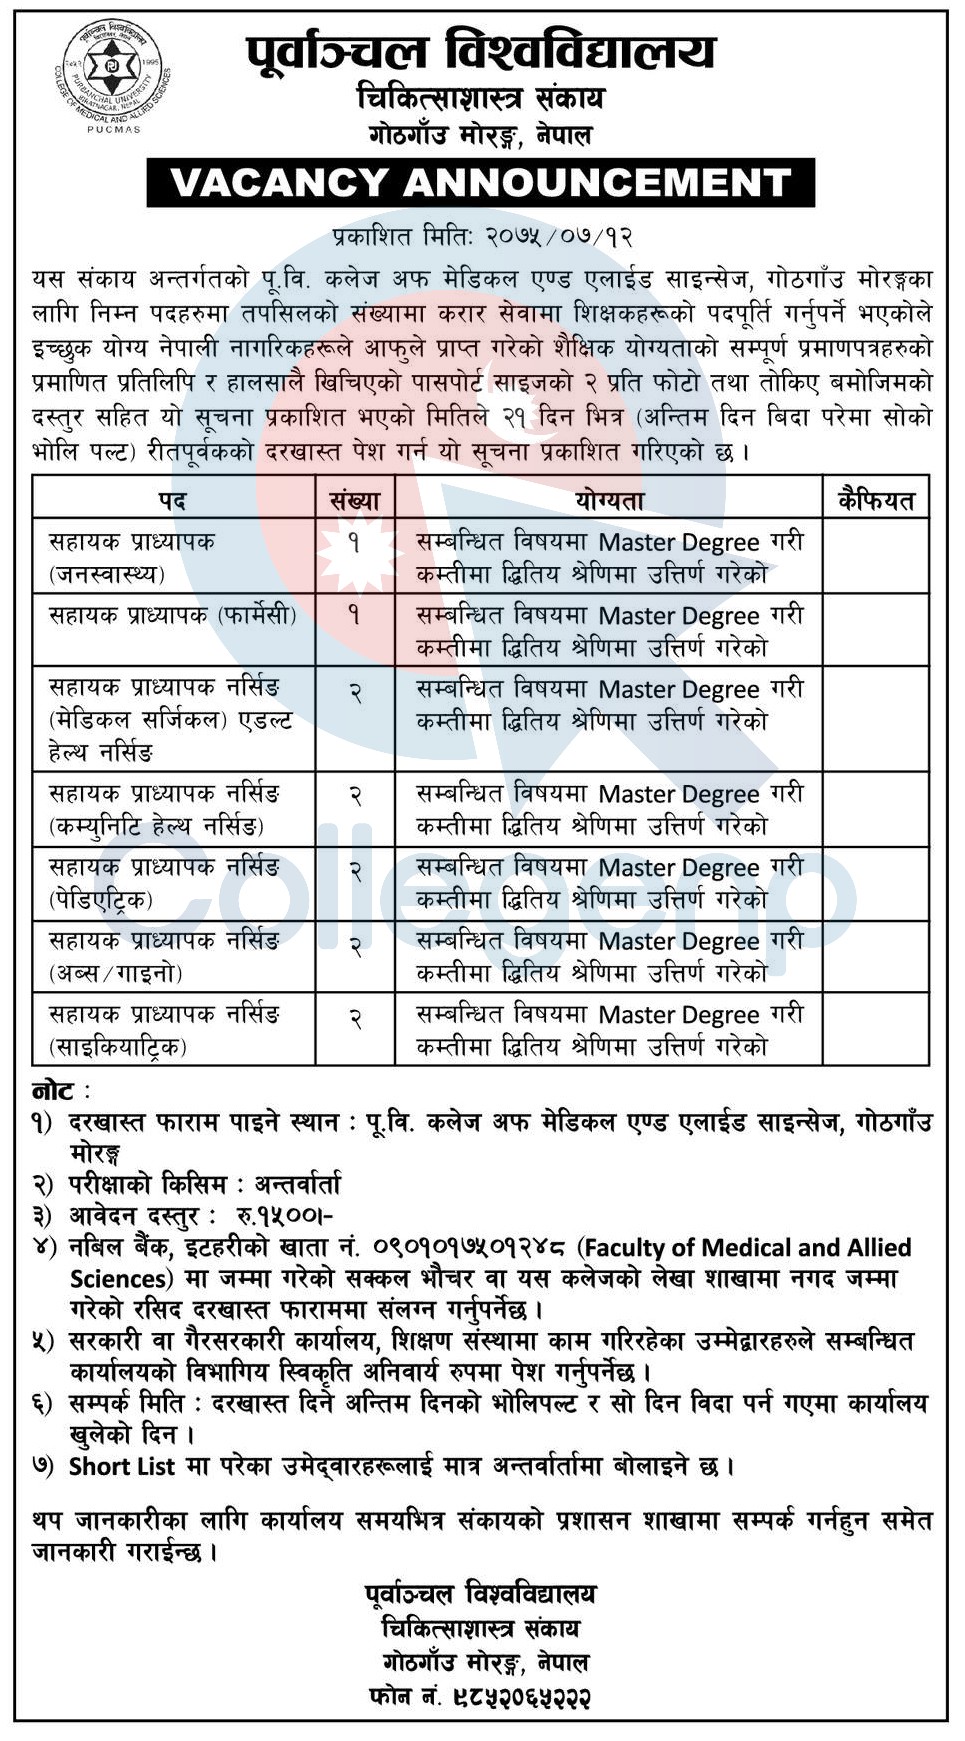 Purbanchal University  College of Medical and Allied Sciences Job Vacancies Notice